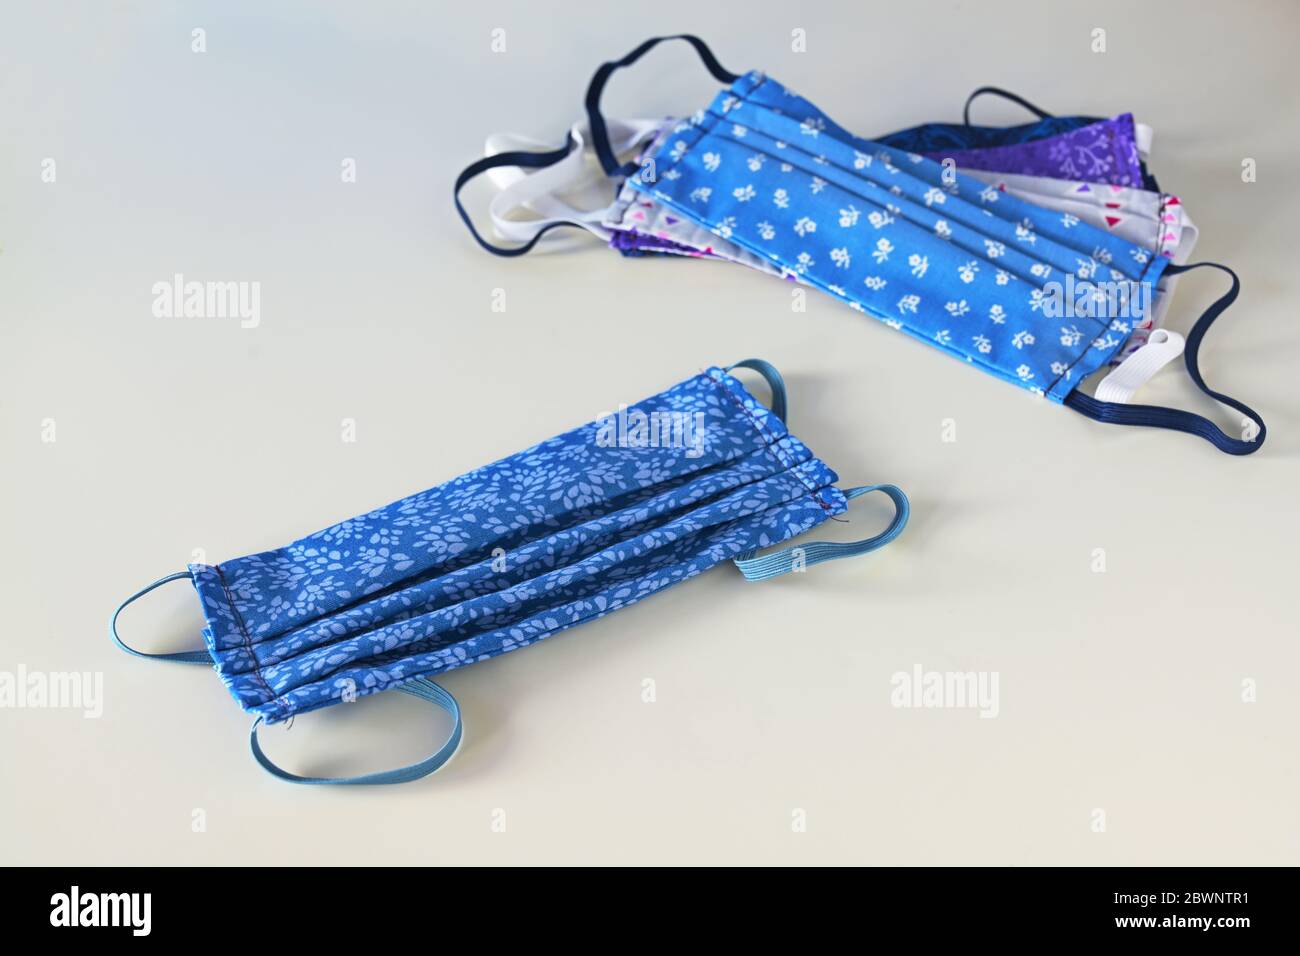 Sustainable washable masks for multiple use, homemade sewn from blue patterned cotton as protection against coronavirus pandemic on a gray background, Stock Photo